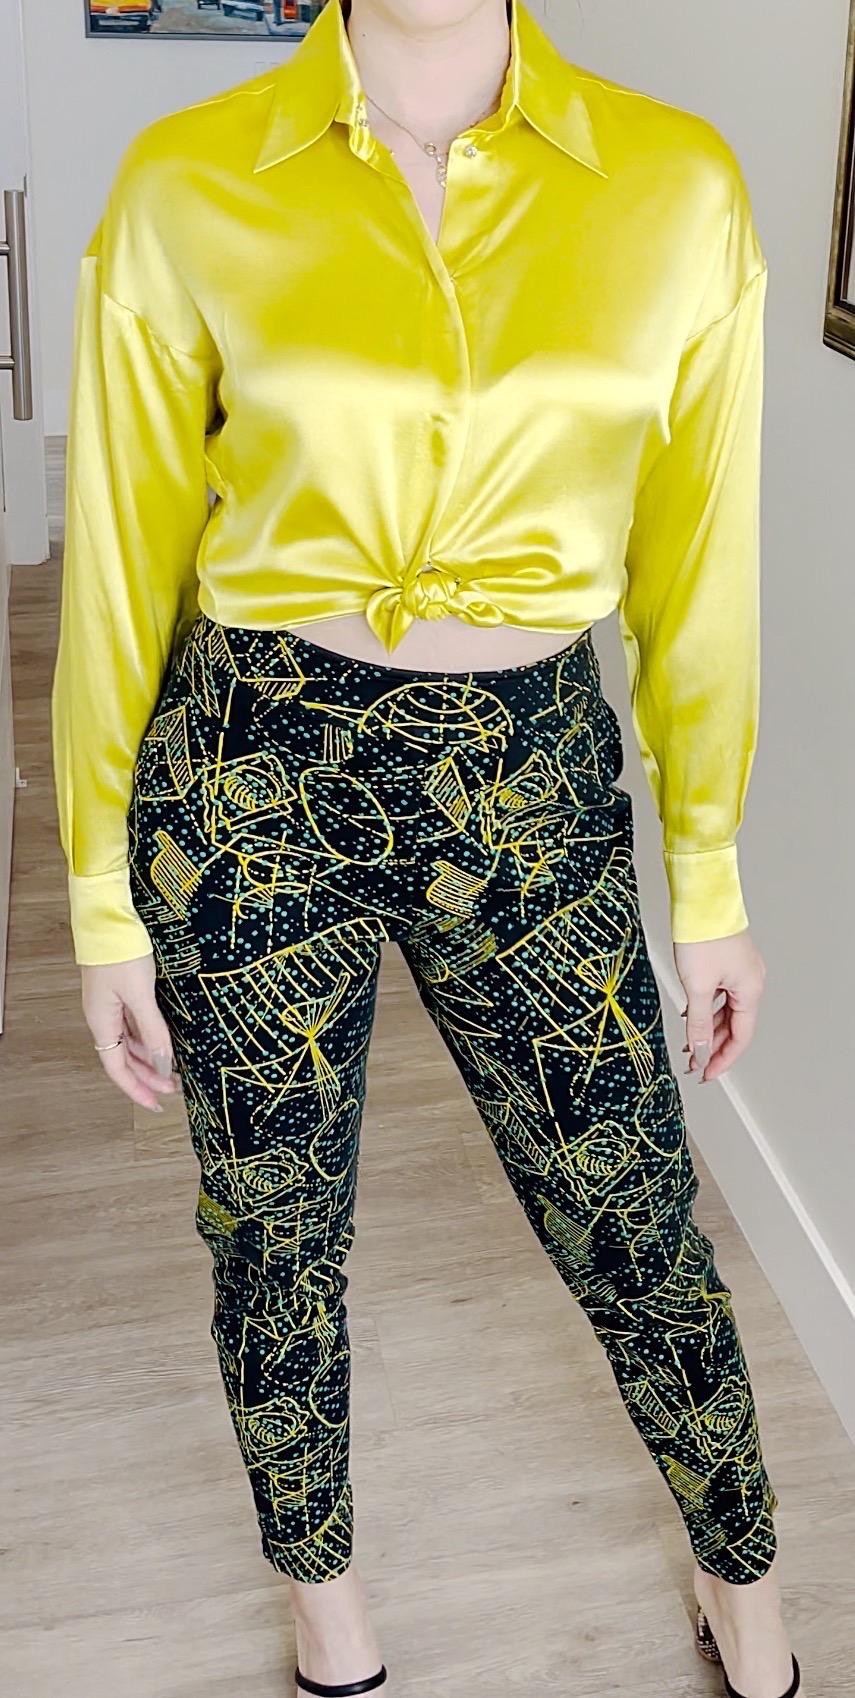 Rare Herve Leger 1980s Hand Painted High Waisted Galaxy Print Cigarette Pants In Excellent Condition For Sale In San Diego, CA